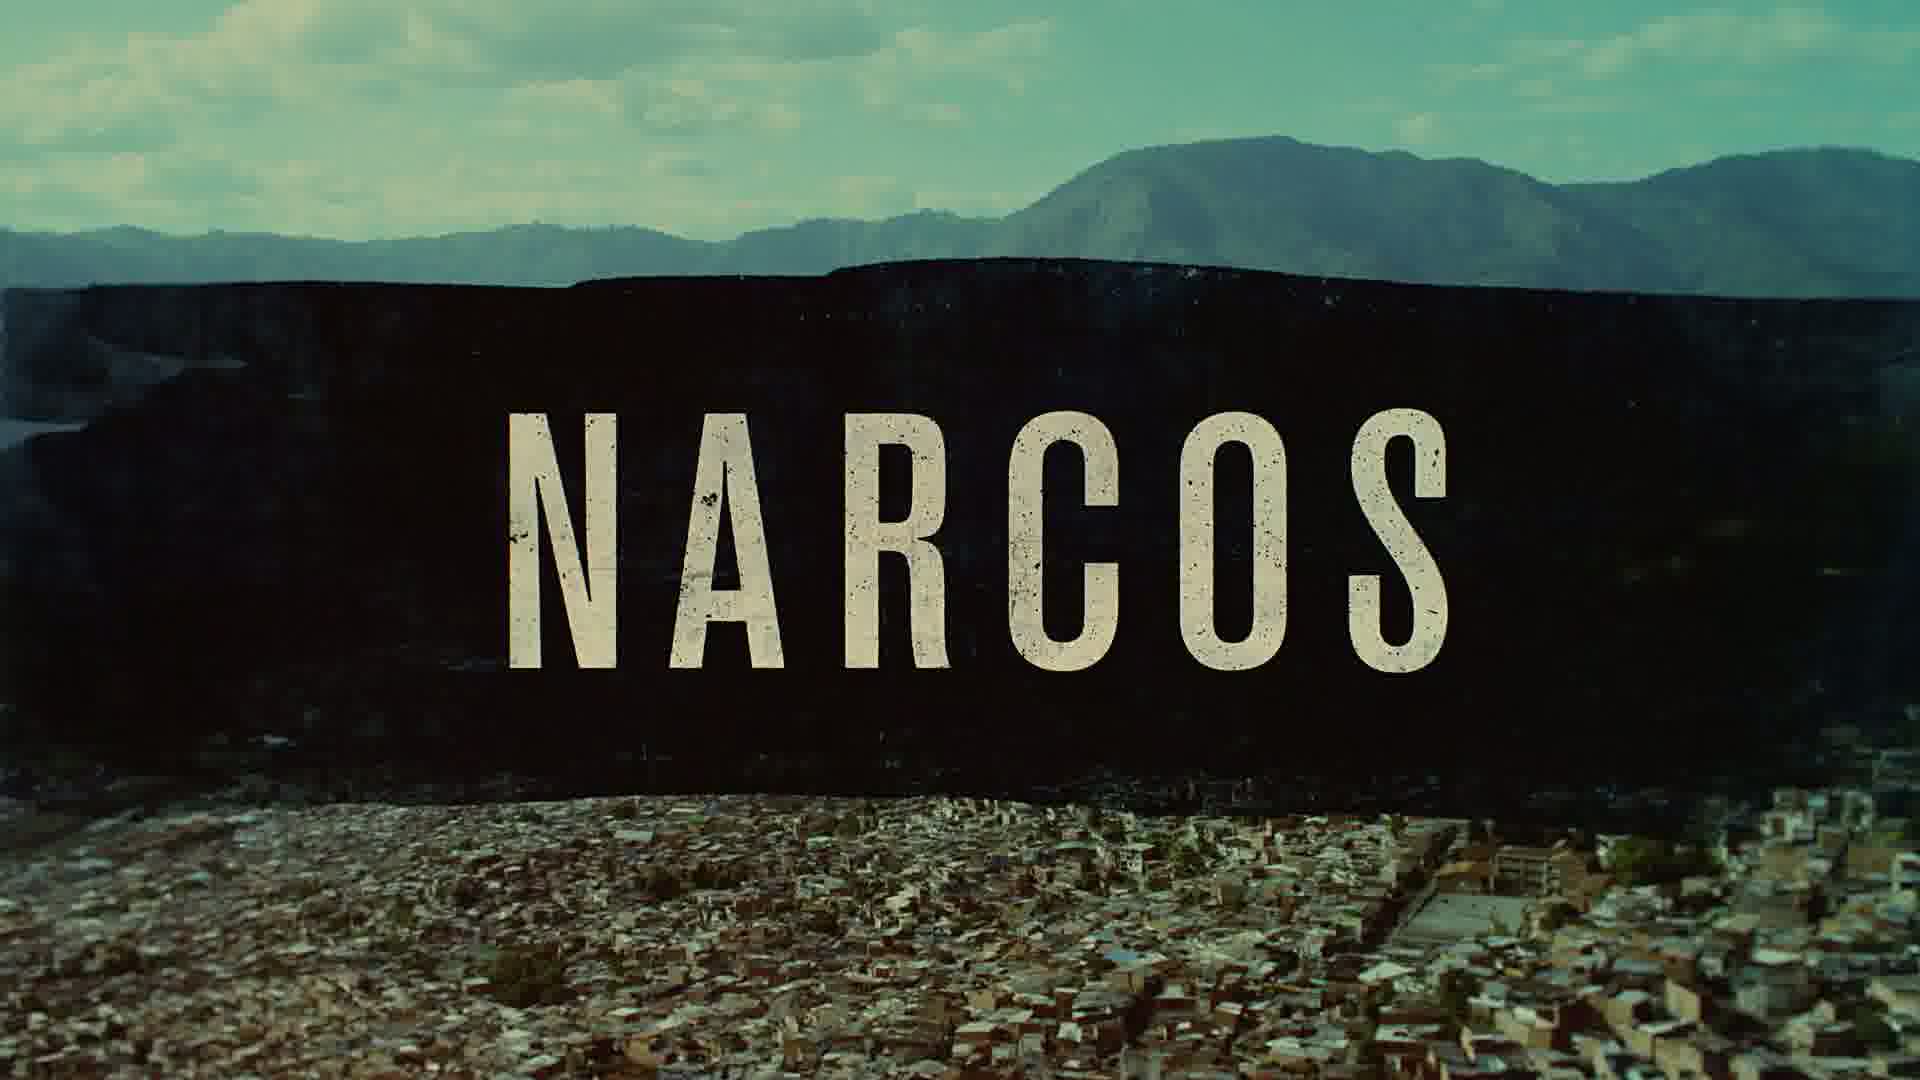 Weekend Download: Narcos is a thrilling, gripping entertainer of a show!